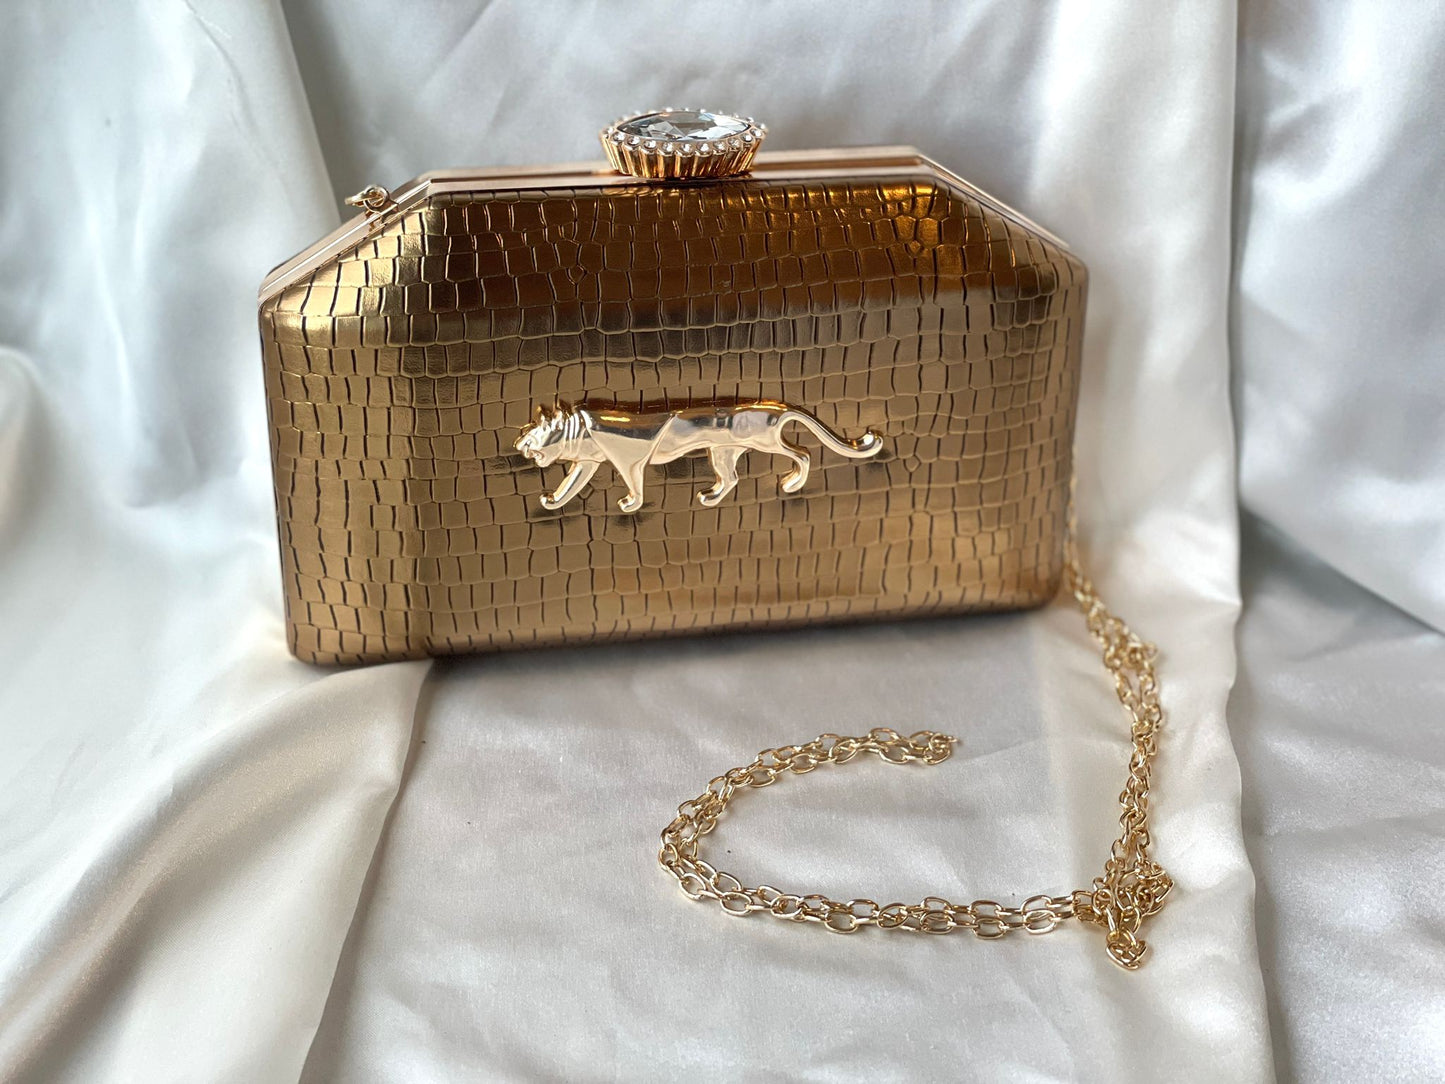 Chic and Stylish Gold Clutch Bag from Sabyasachi